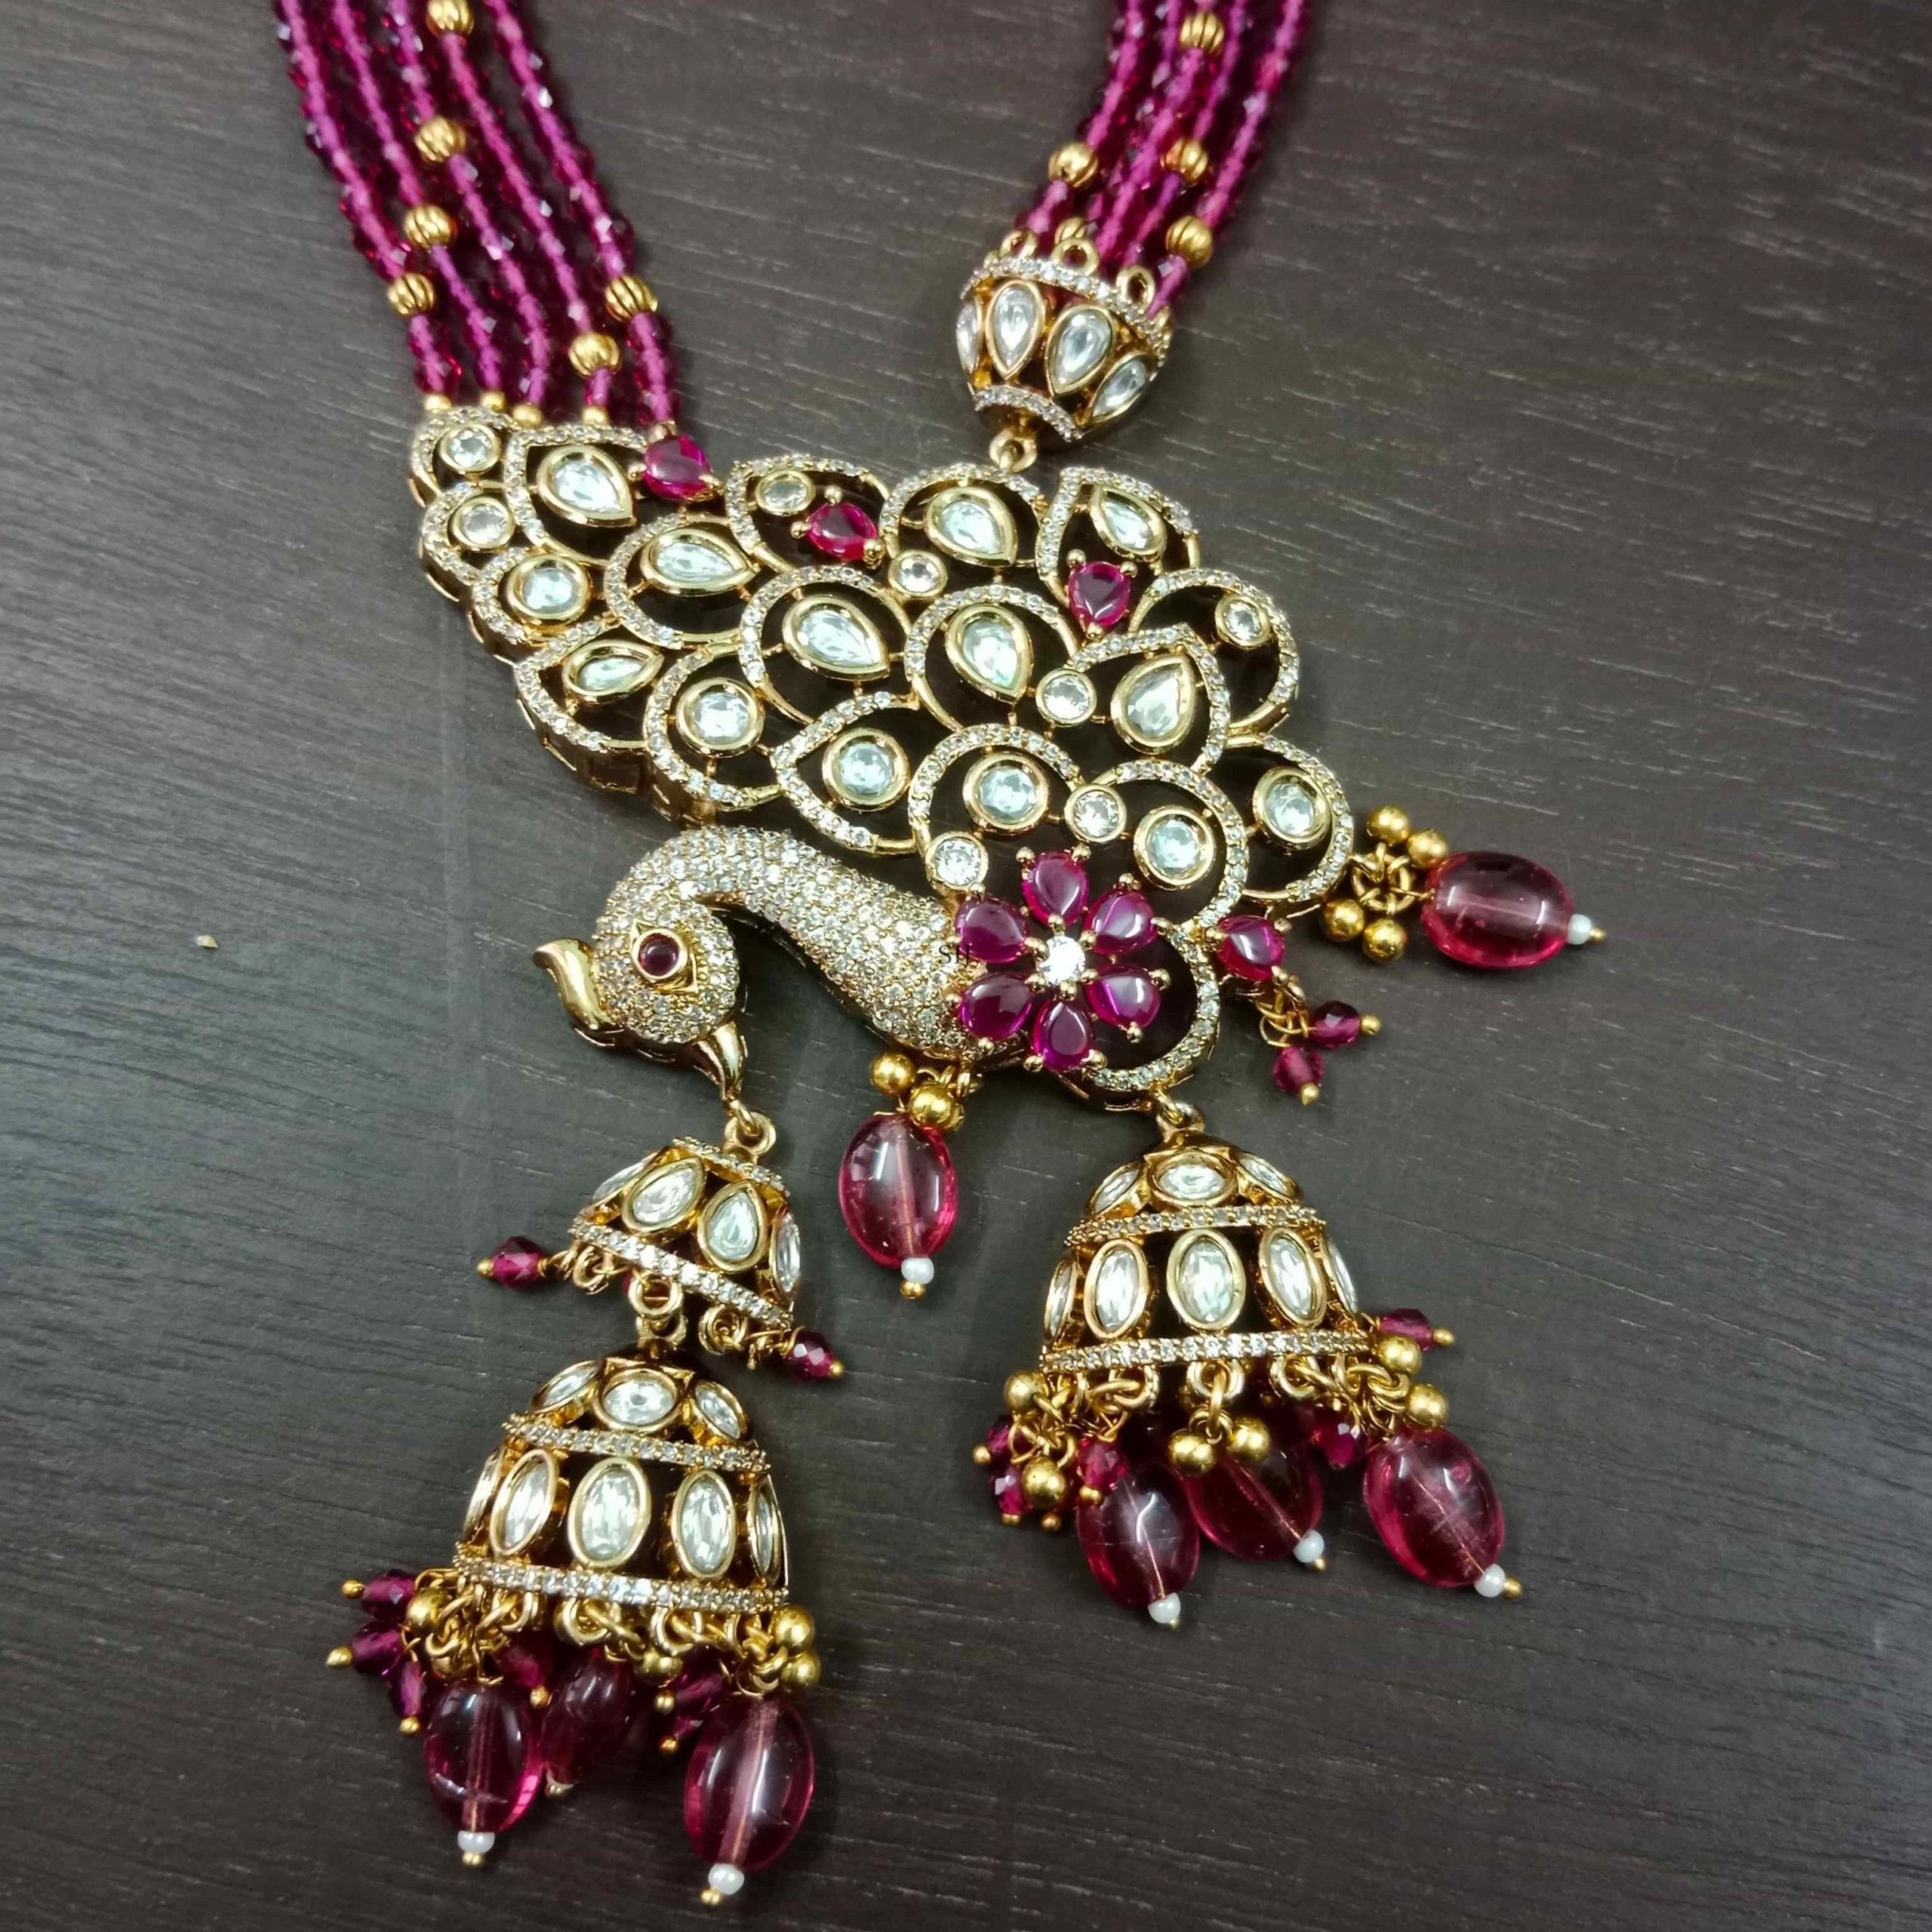 Shimmering Victorian Peacock Design With Maroon Beads Haram